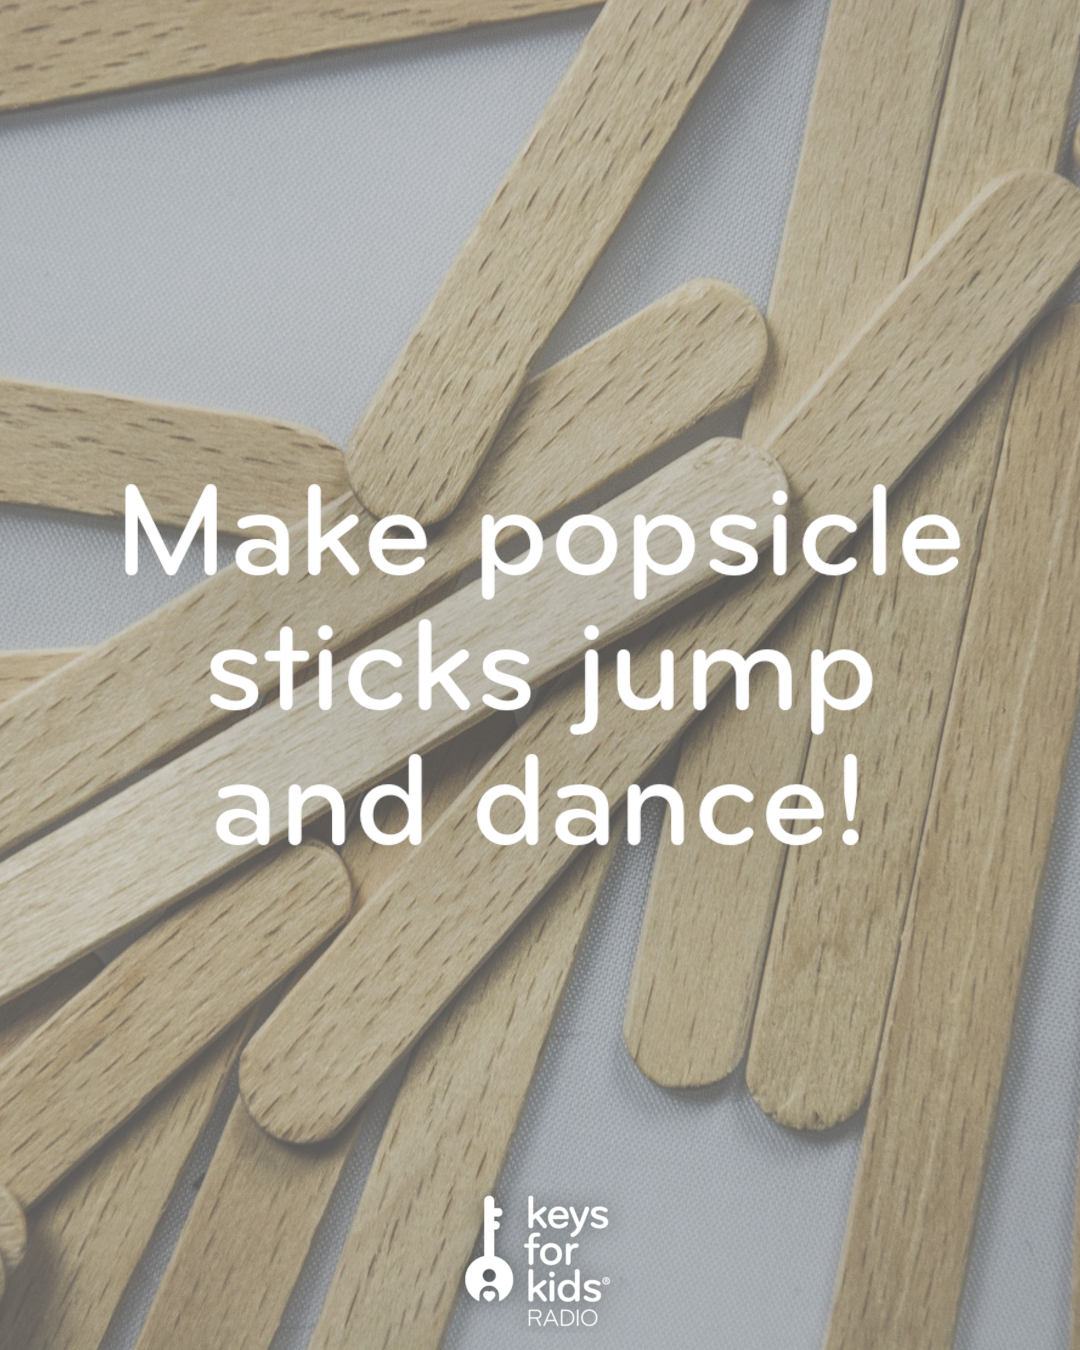 Try This Popsicle Stick Science Experiment!